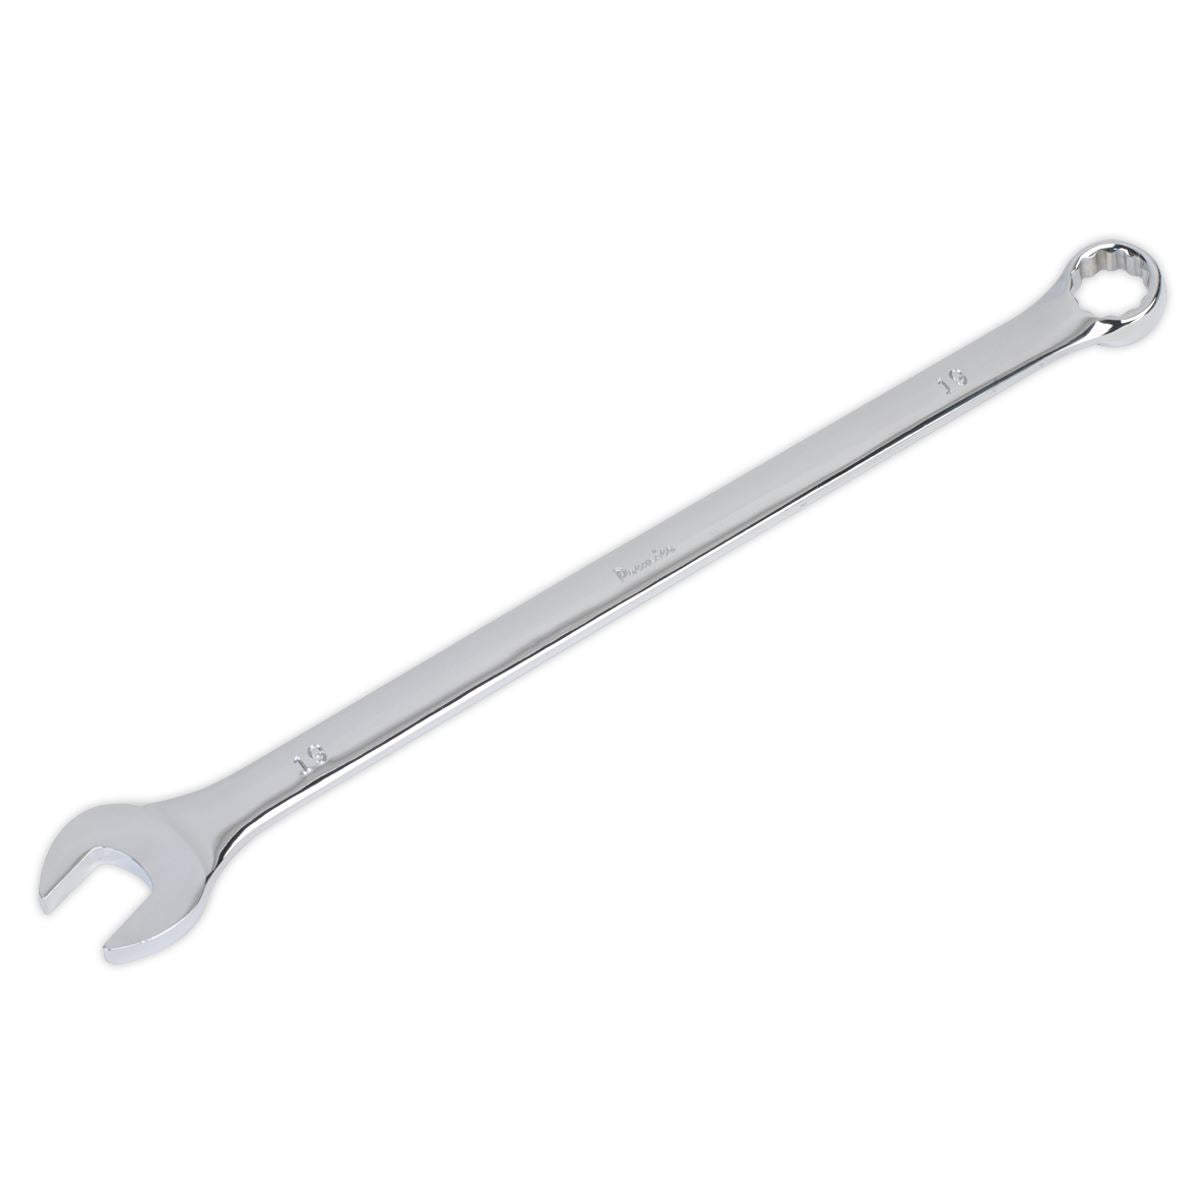 Sealey Premier Combination Spanner Extra-Long 19mm